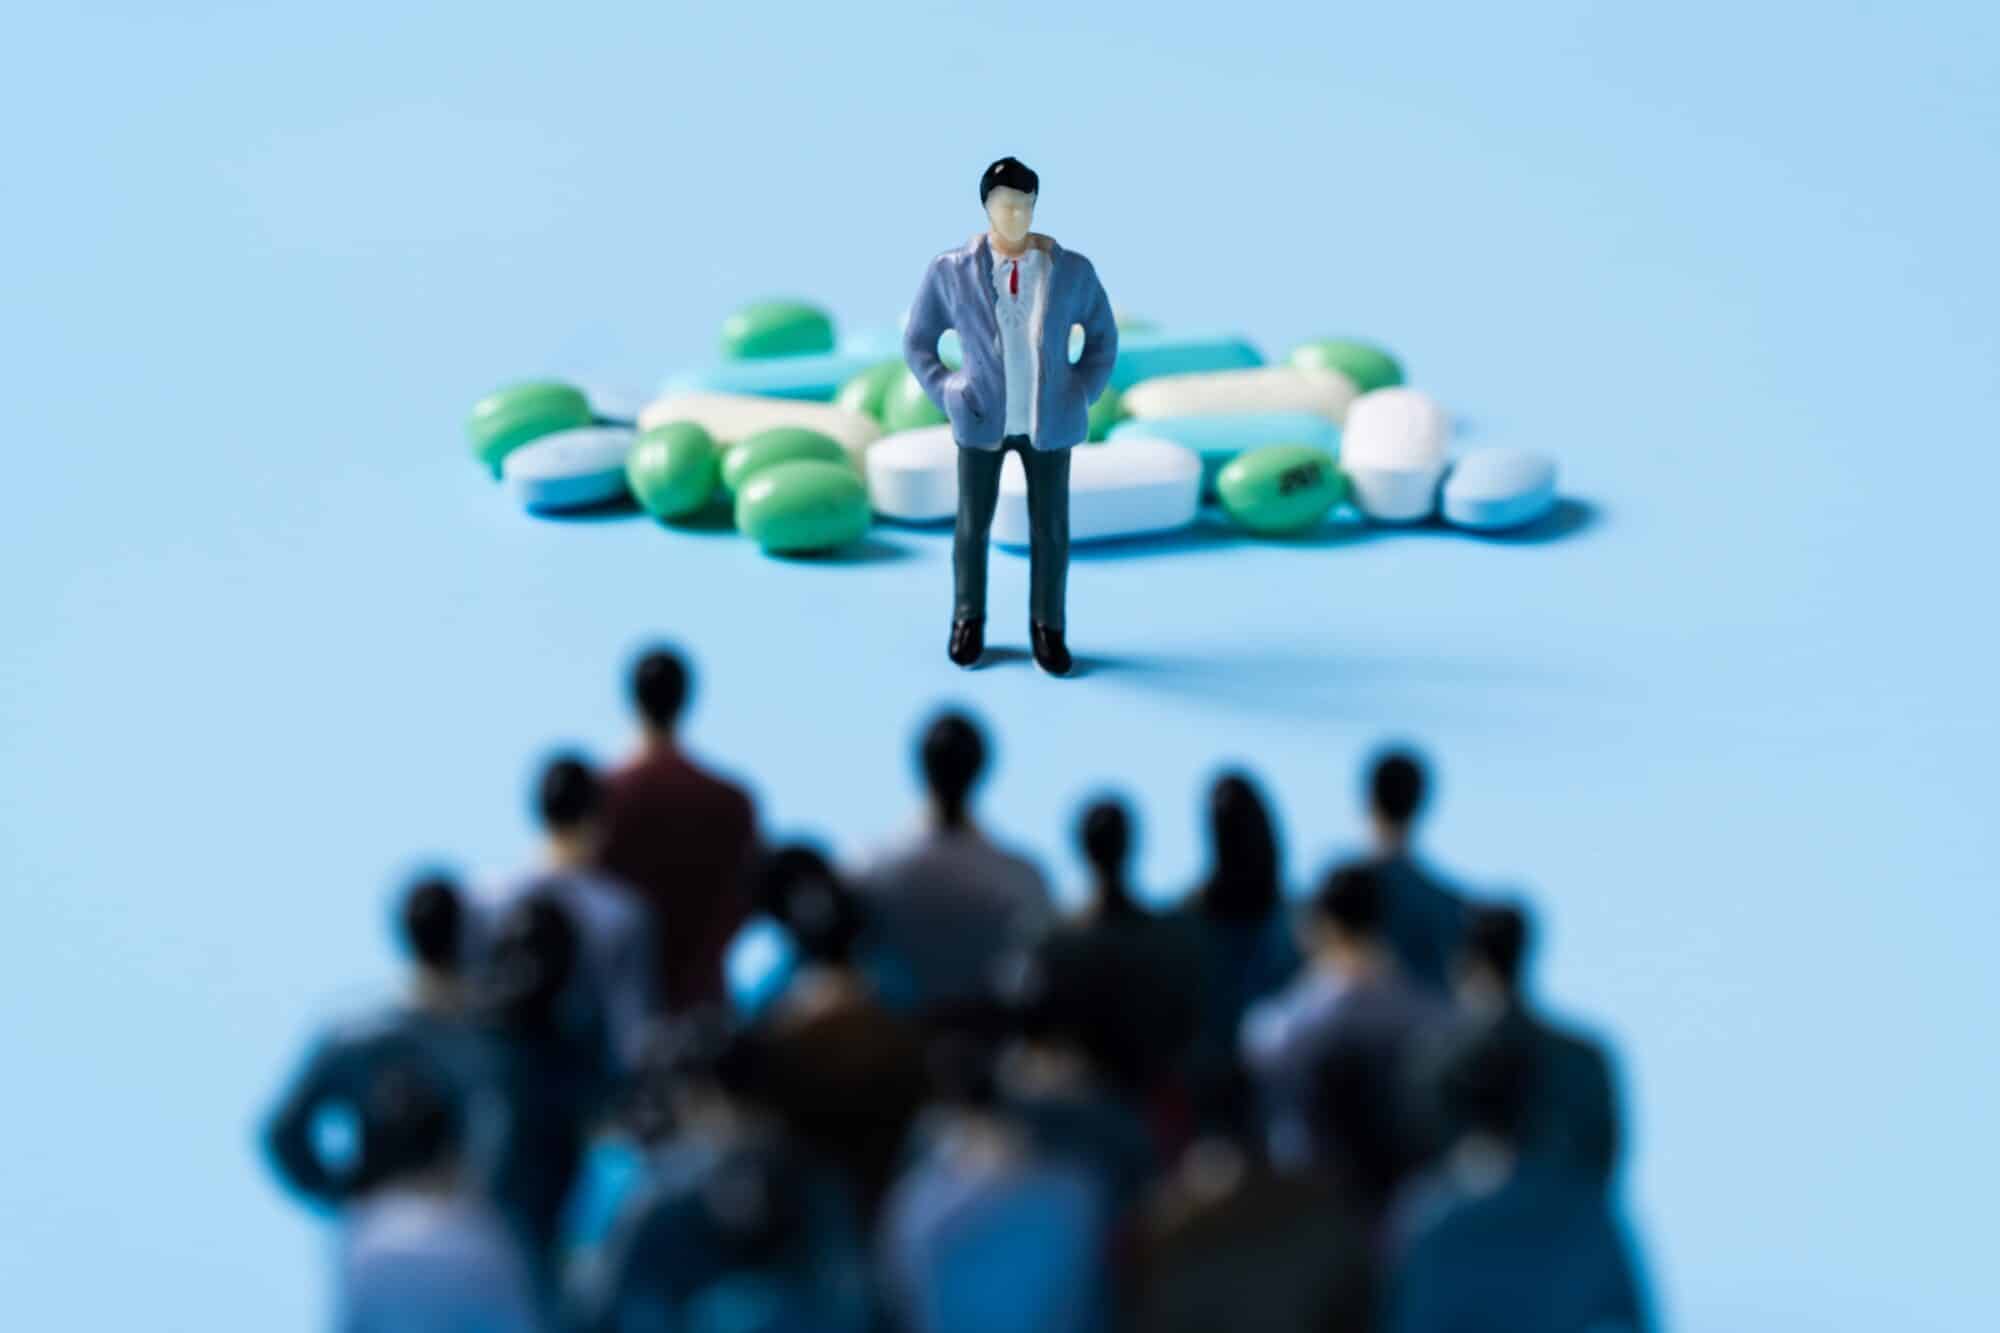 A miniature figure of a man stands in front of a pile of medicine pills, with a crowd of miniature people crowded in the forefront, facing the individual guarding the medicine.